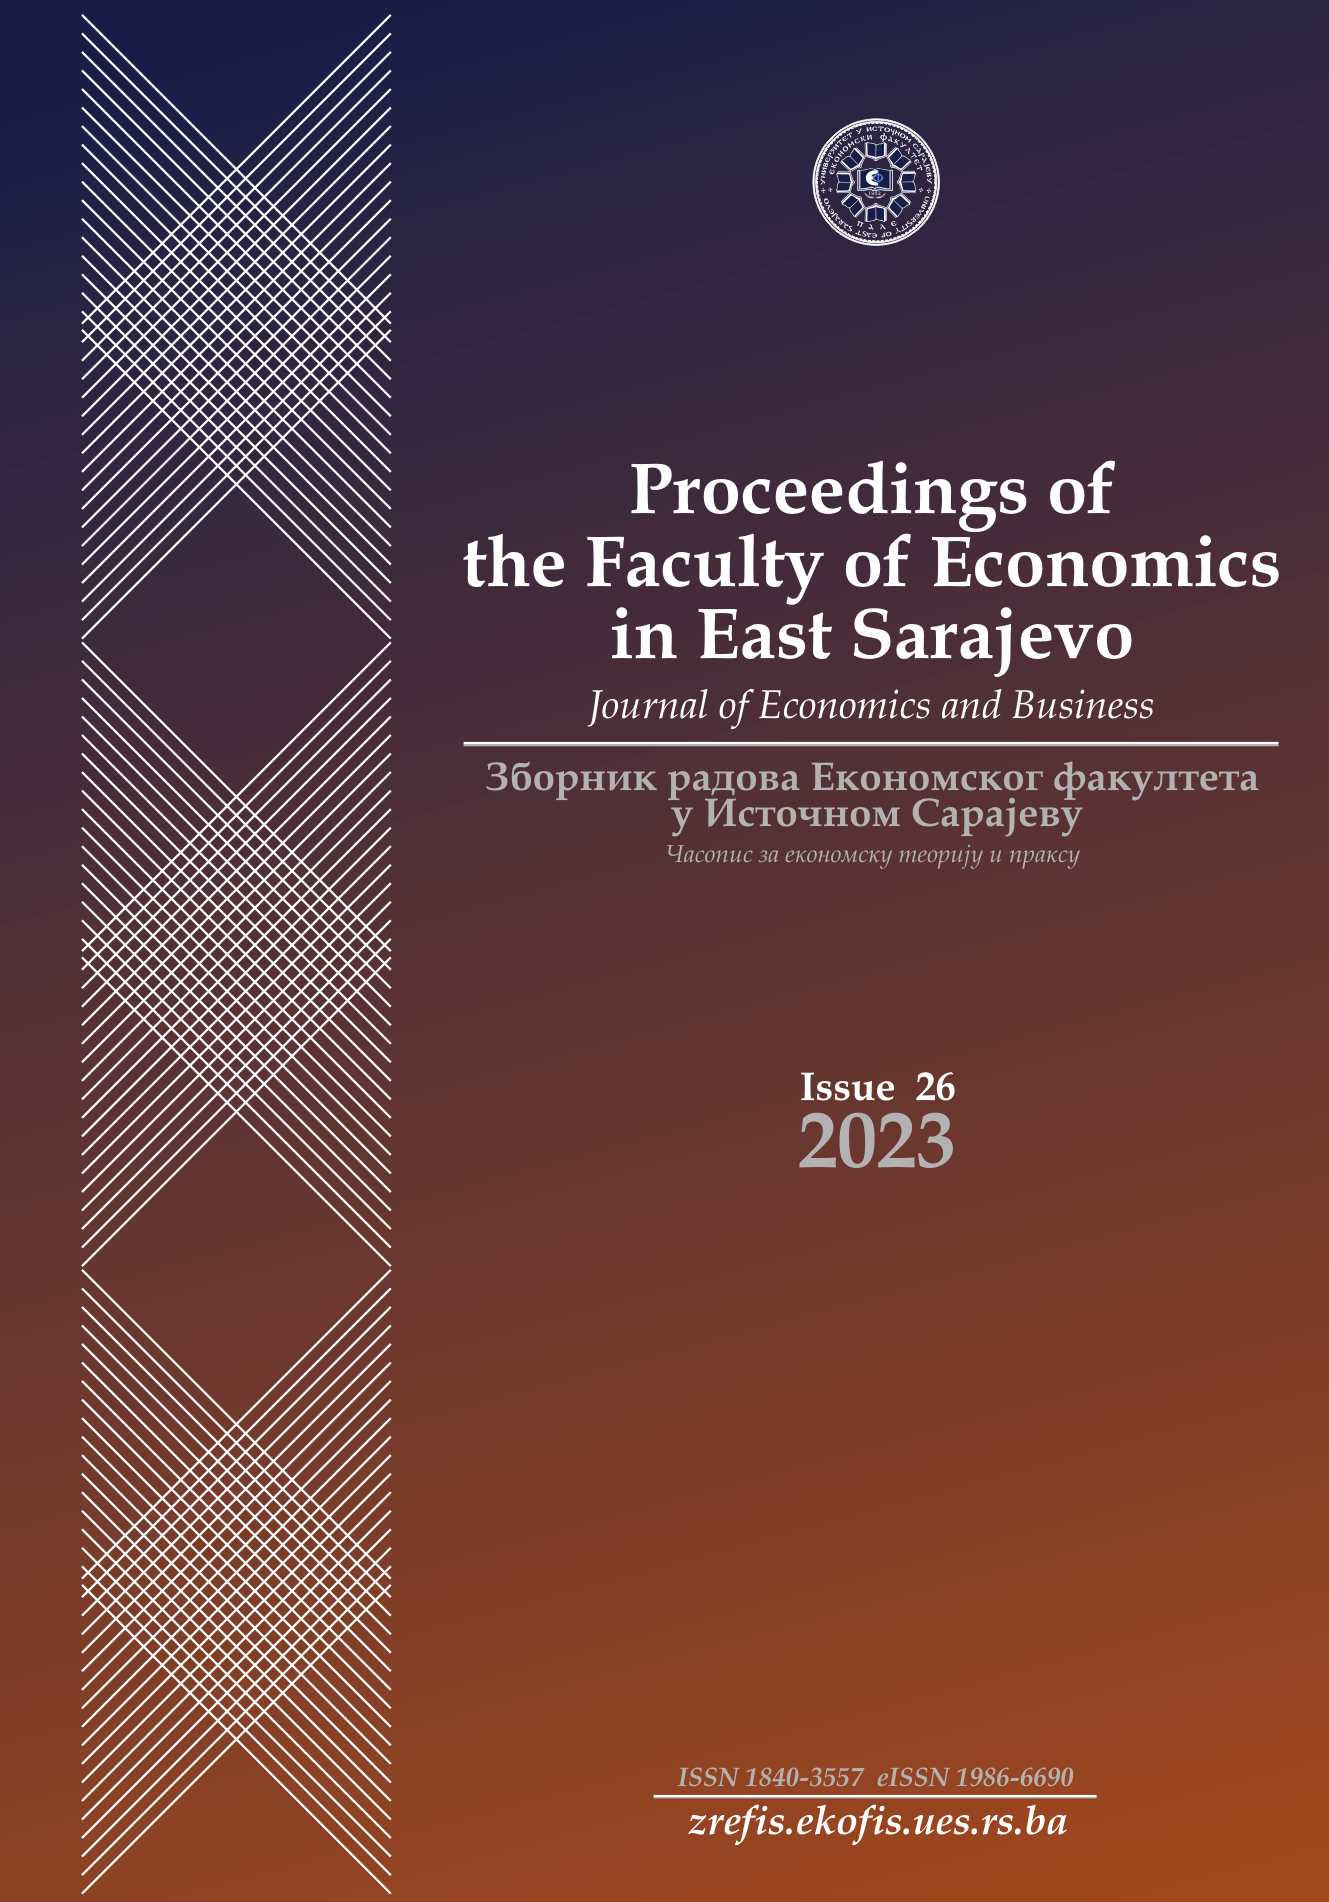 THE EFFECT OF CAPITAL EXPENDITURE IN THE FORM OF FIXED ASSETS ON ECONOMIC GROWTH IN THE REPUBLIC OF SERBIA Cover Image